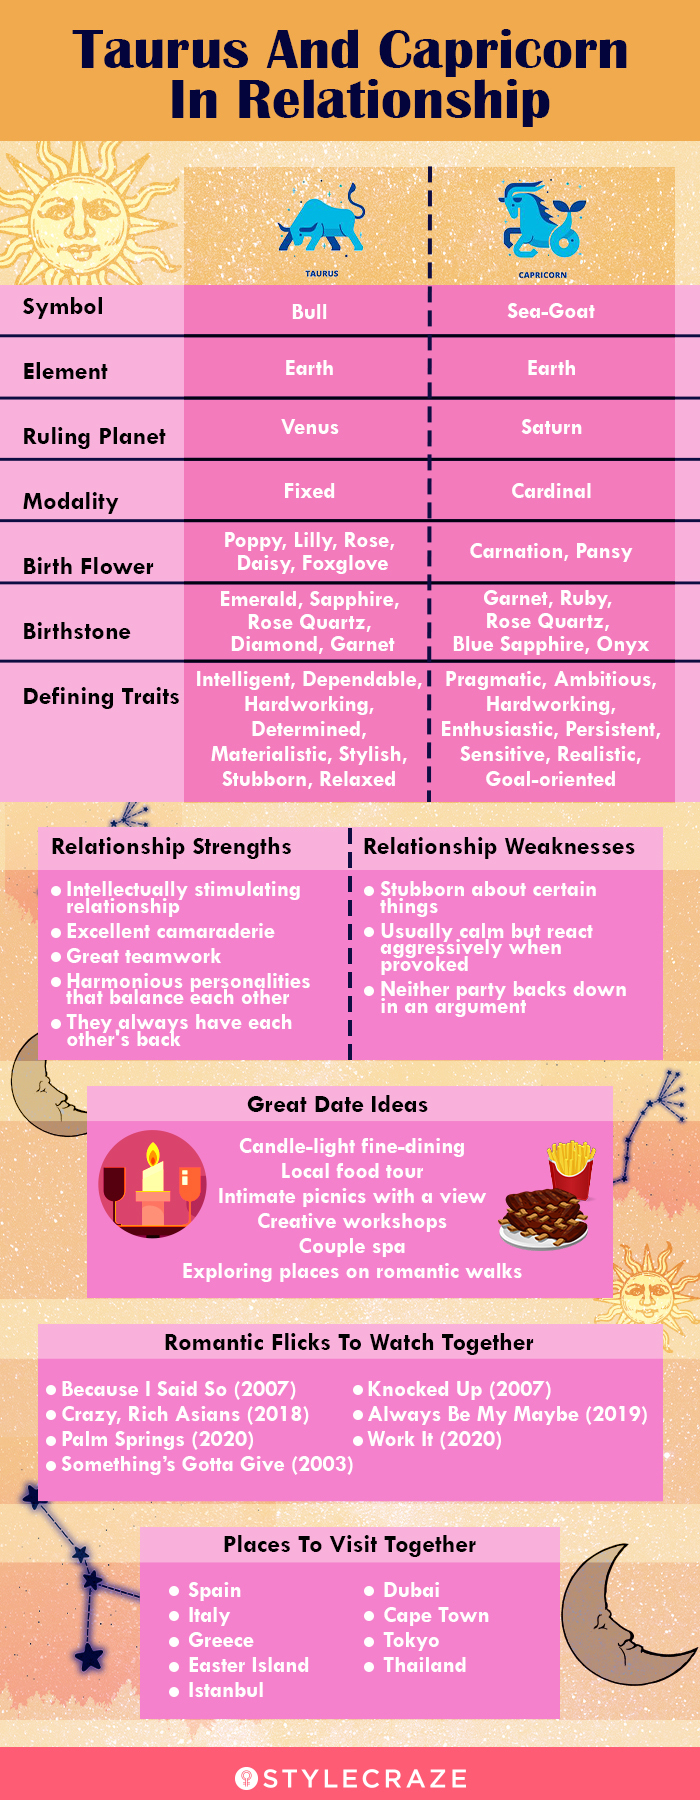 taurus and capricorn in relationship [infographic]